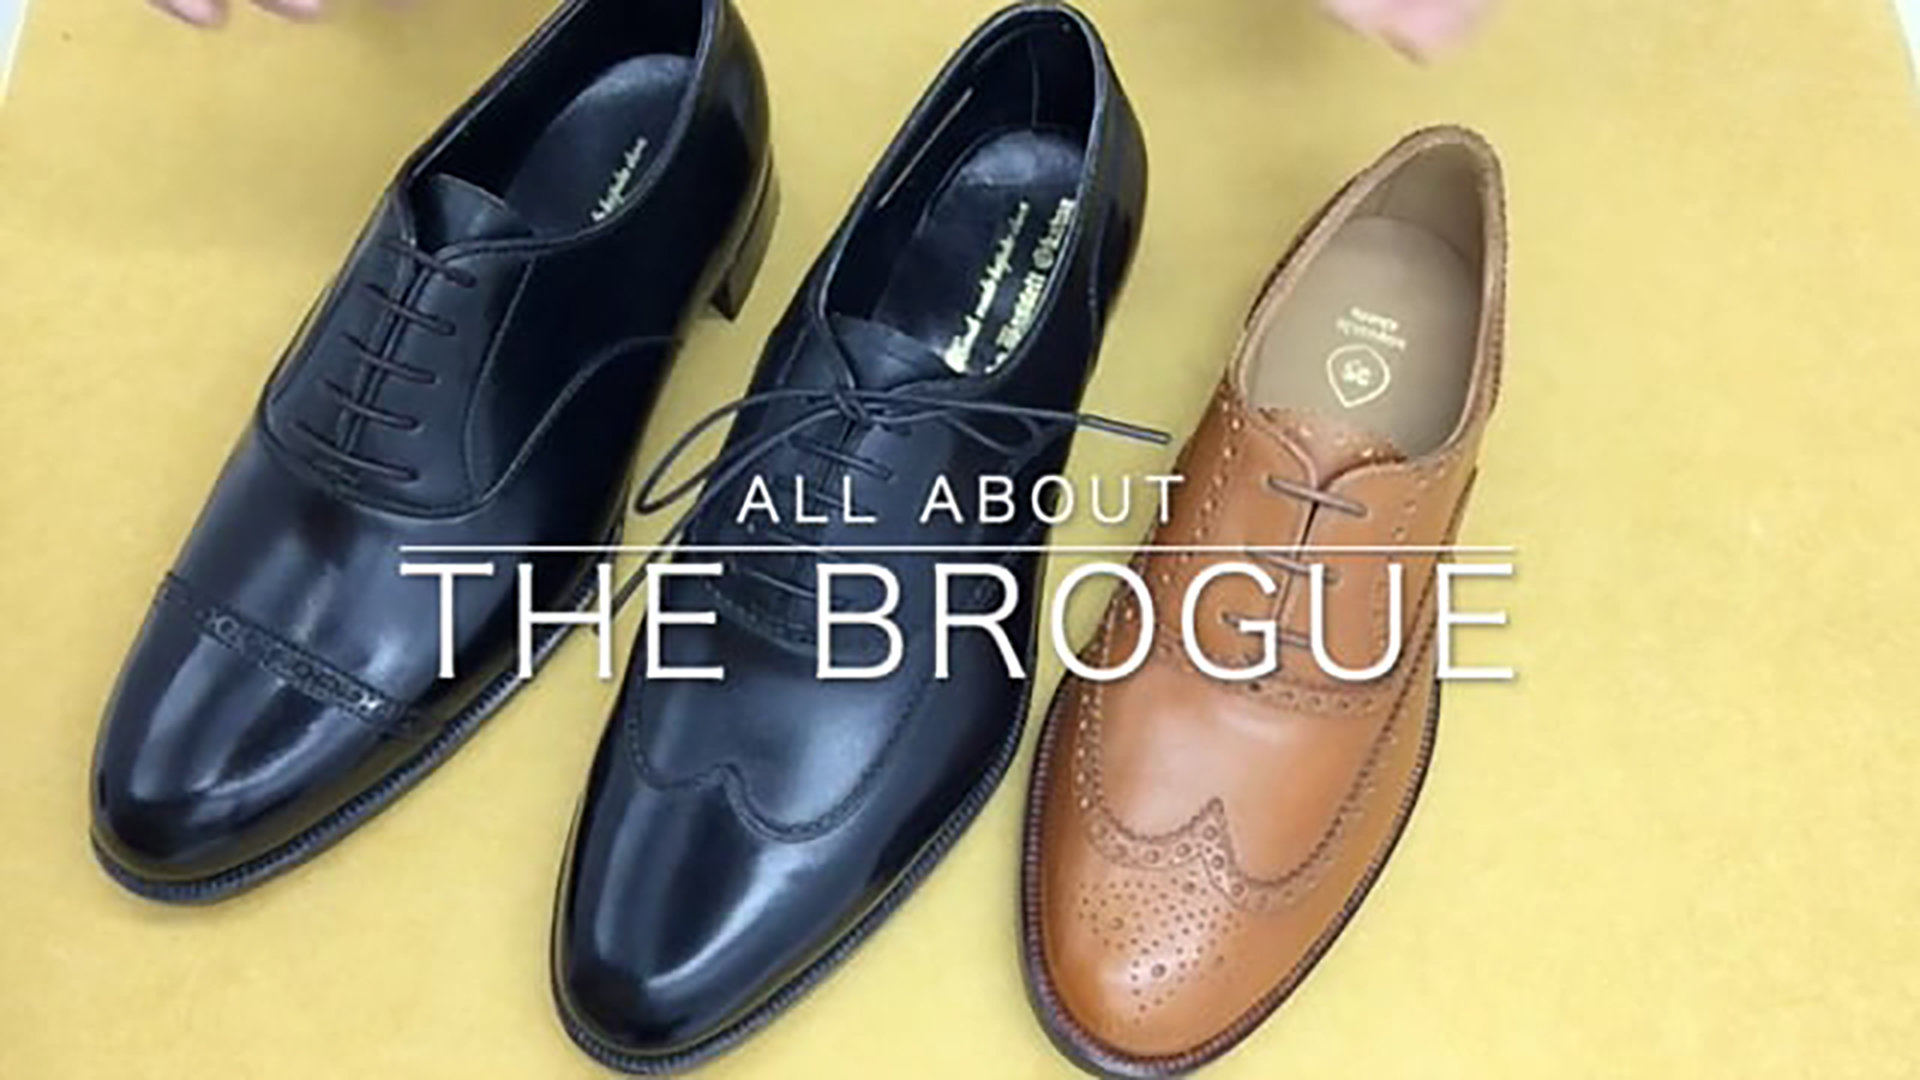 BWS FILM – All About the Brogue